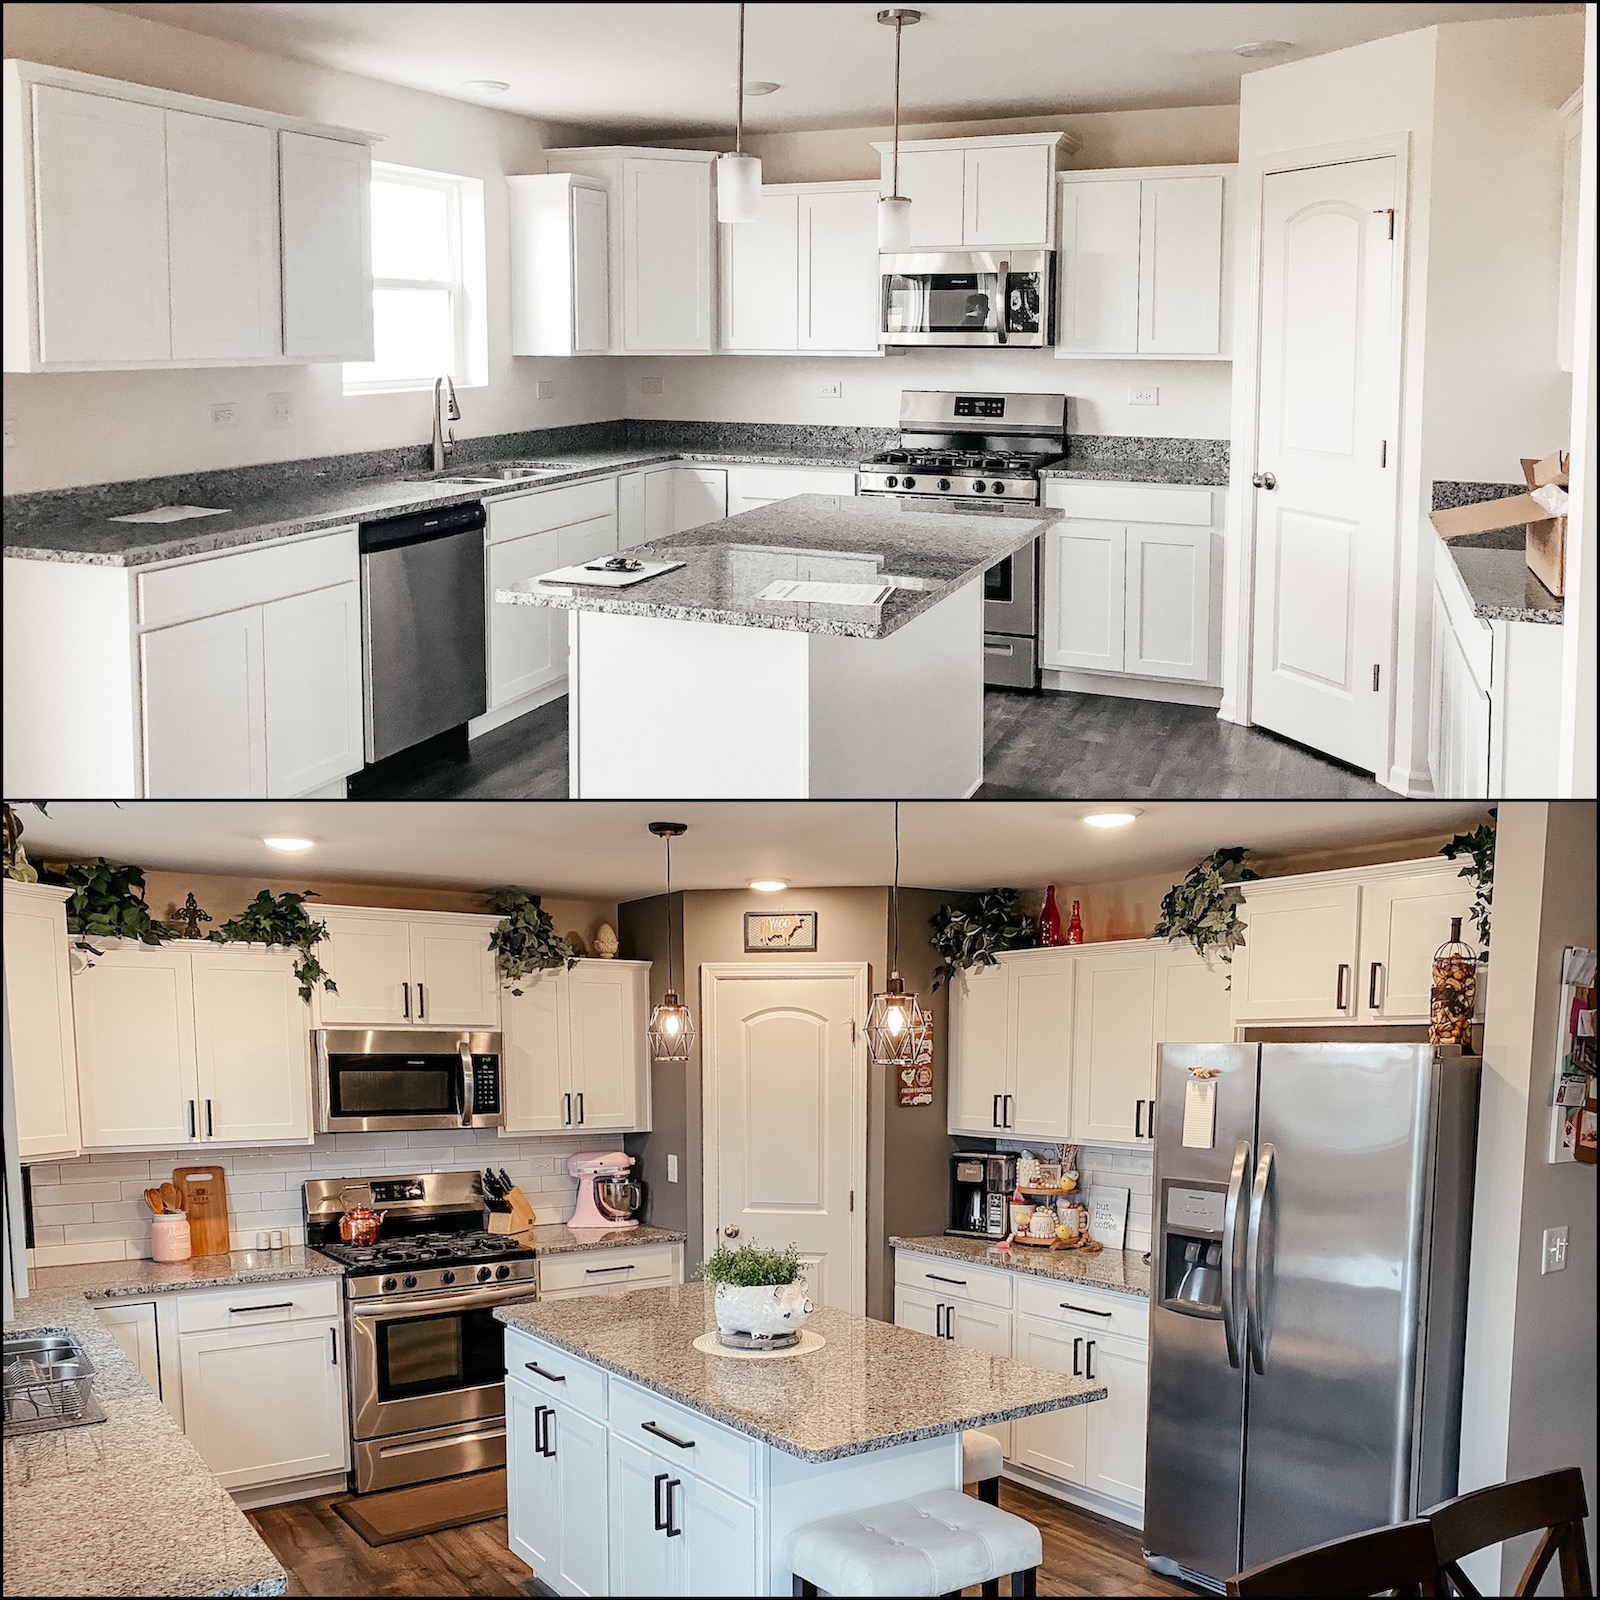 Before & After: Creating a Warm Farmhouse Kitchen